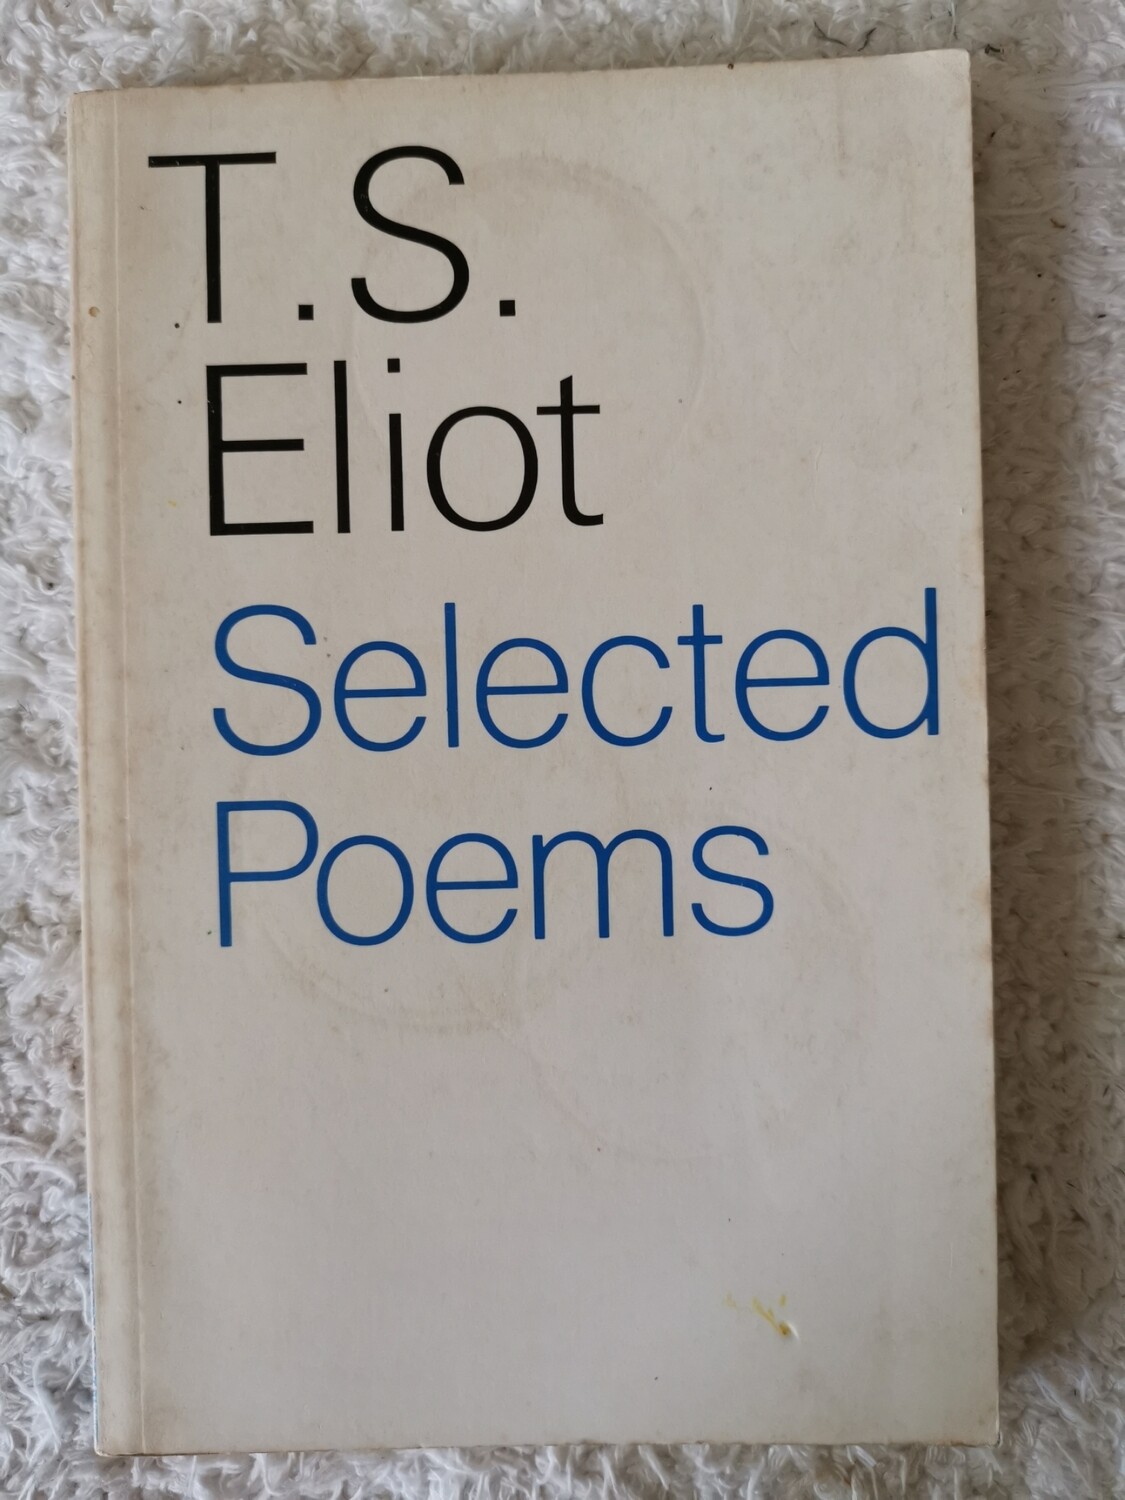 Selected poems, T. S. Eliot